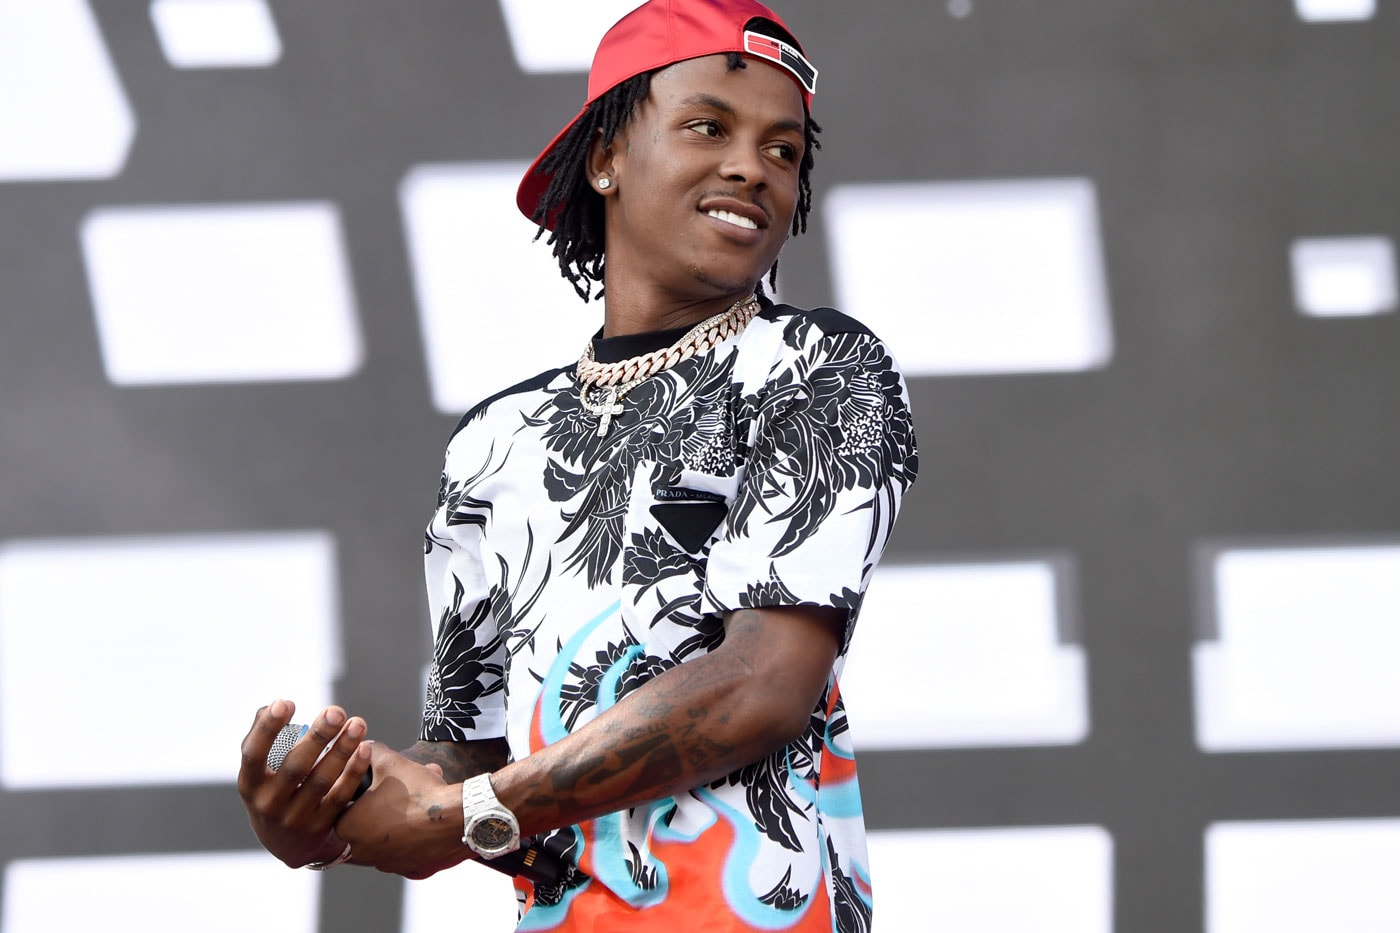 Rich the Kid Pusha T Single Preview